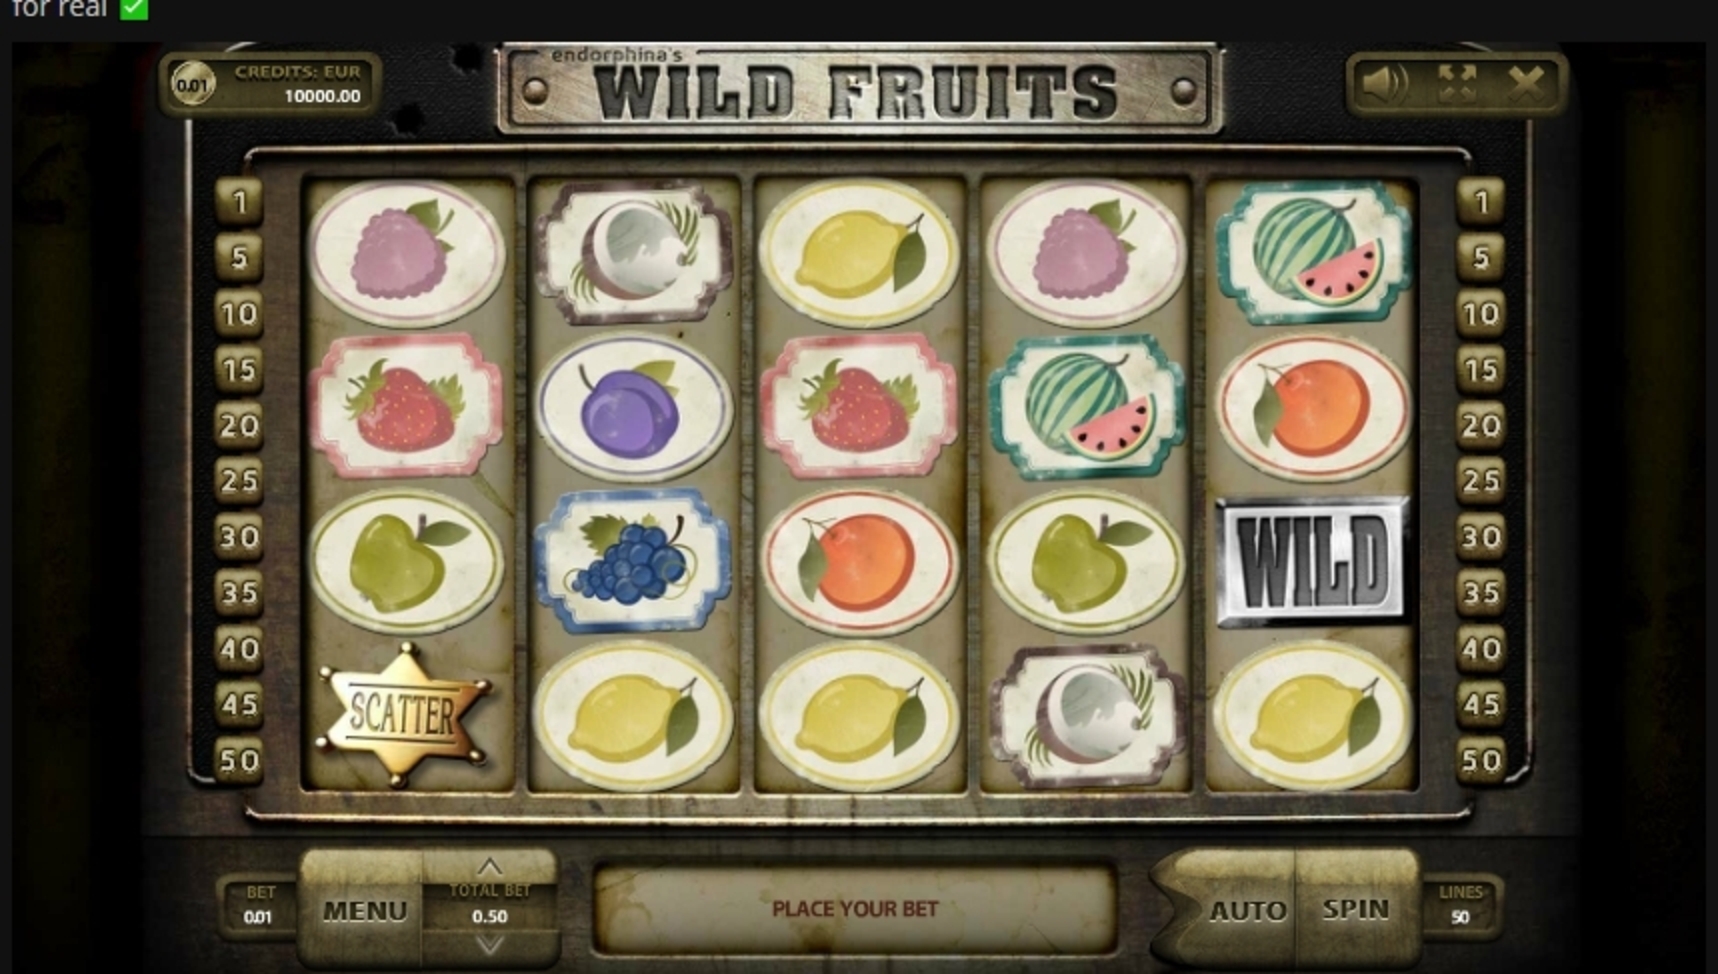 Reels in Wild Fruits Slot Game by Endorphina